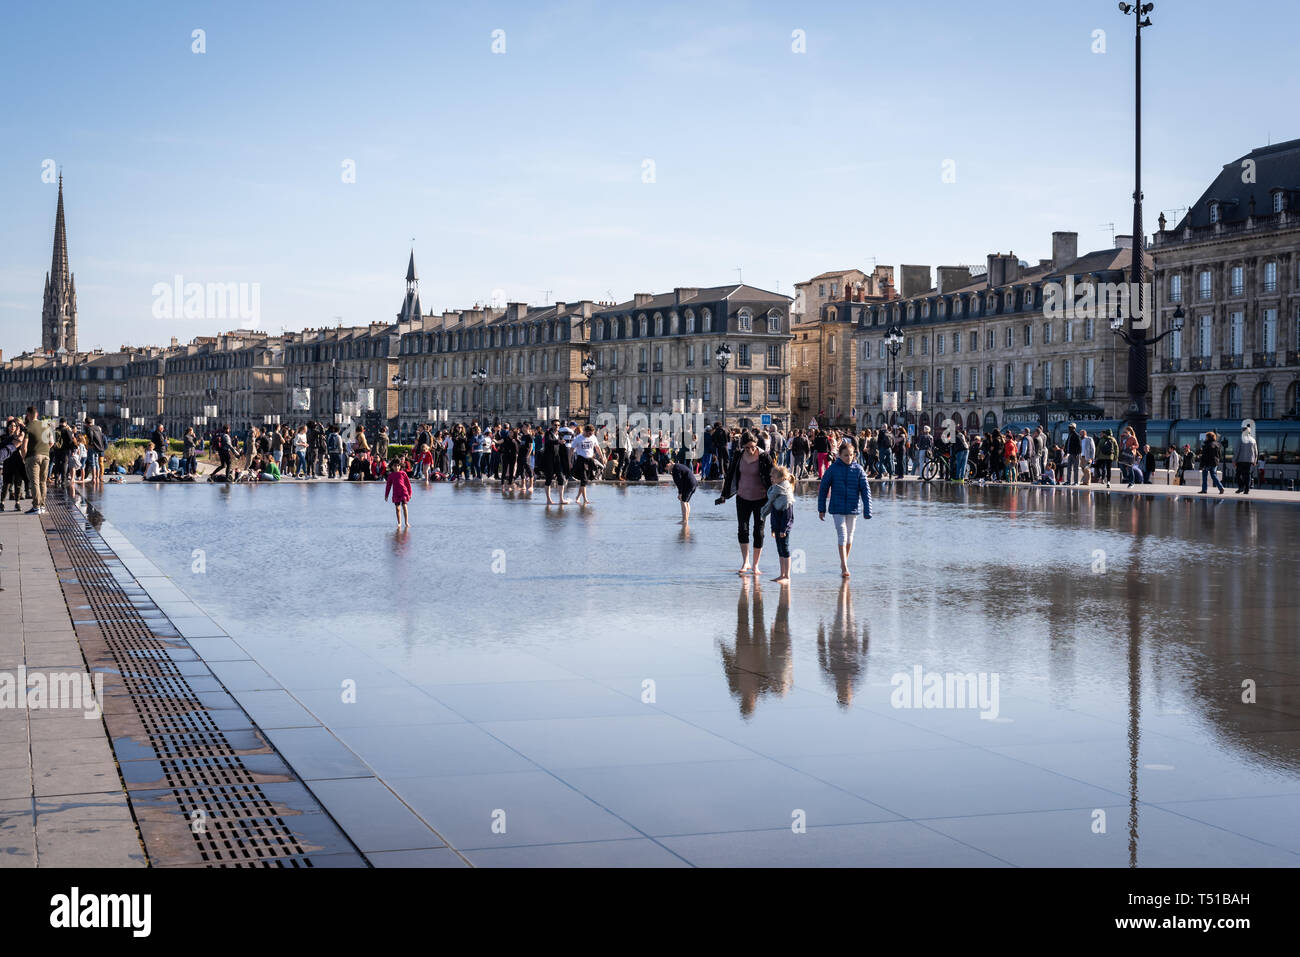 BORDEAUX, FRANCE - APRIL 14, 2019: The water mirror of the Bordeaux quays on a sunny spring day Stock Photo